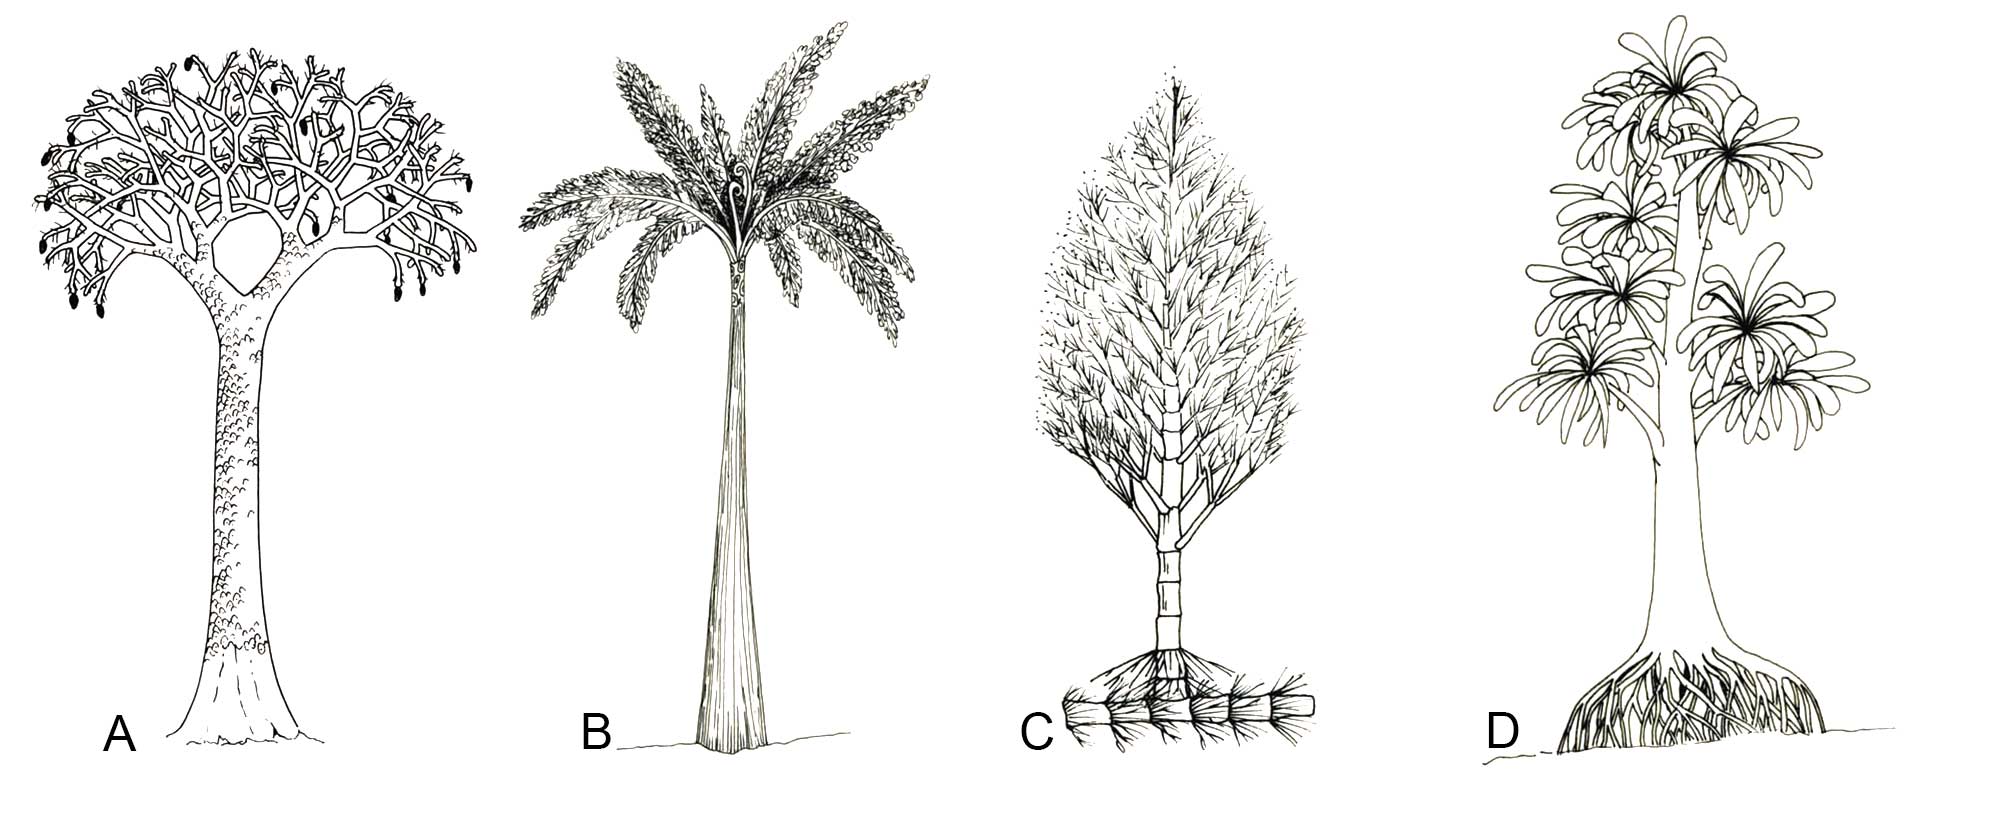 Four drawings showing reconstructions of Paleozoic trees. From left to right: Lepidodendron, a tree fern, the giant horsetail calamites, and cordaites, a plant related to conifers.